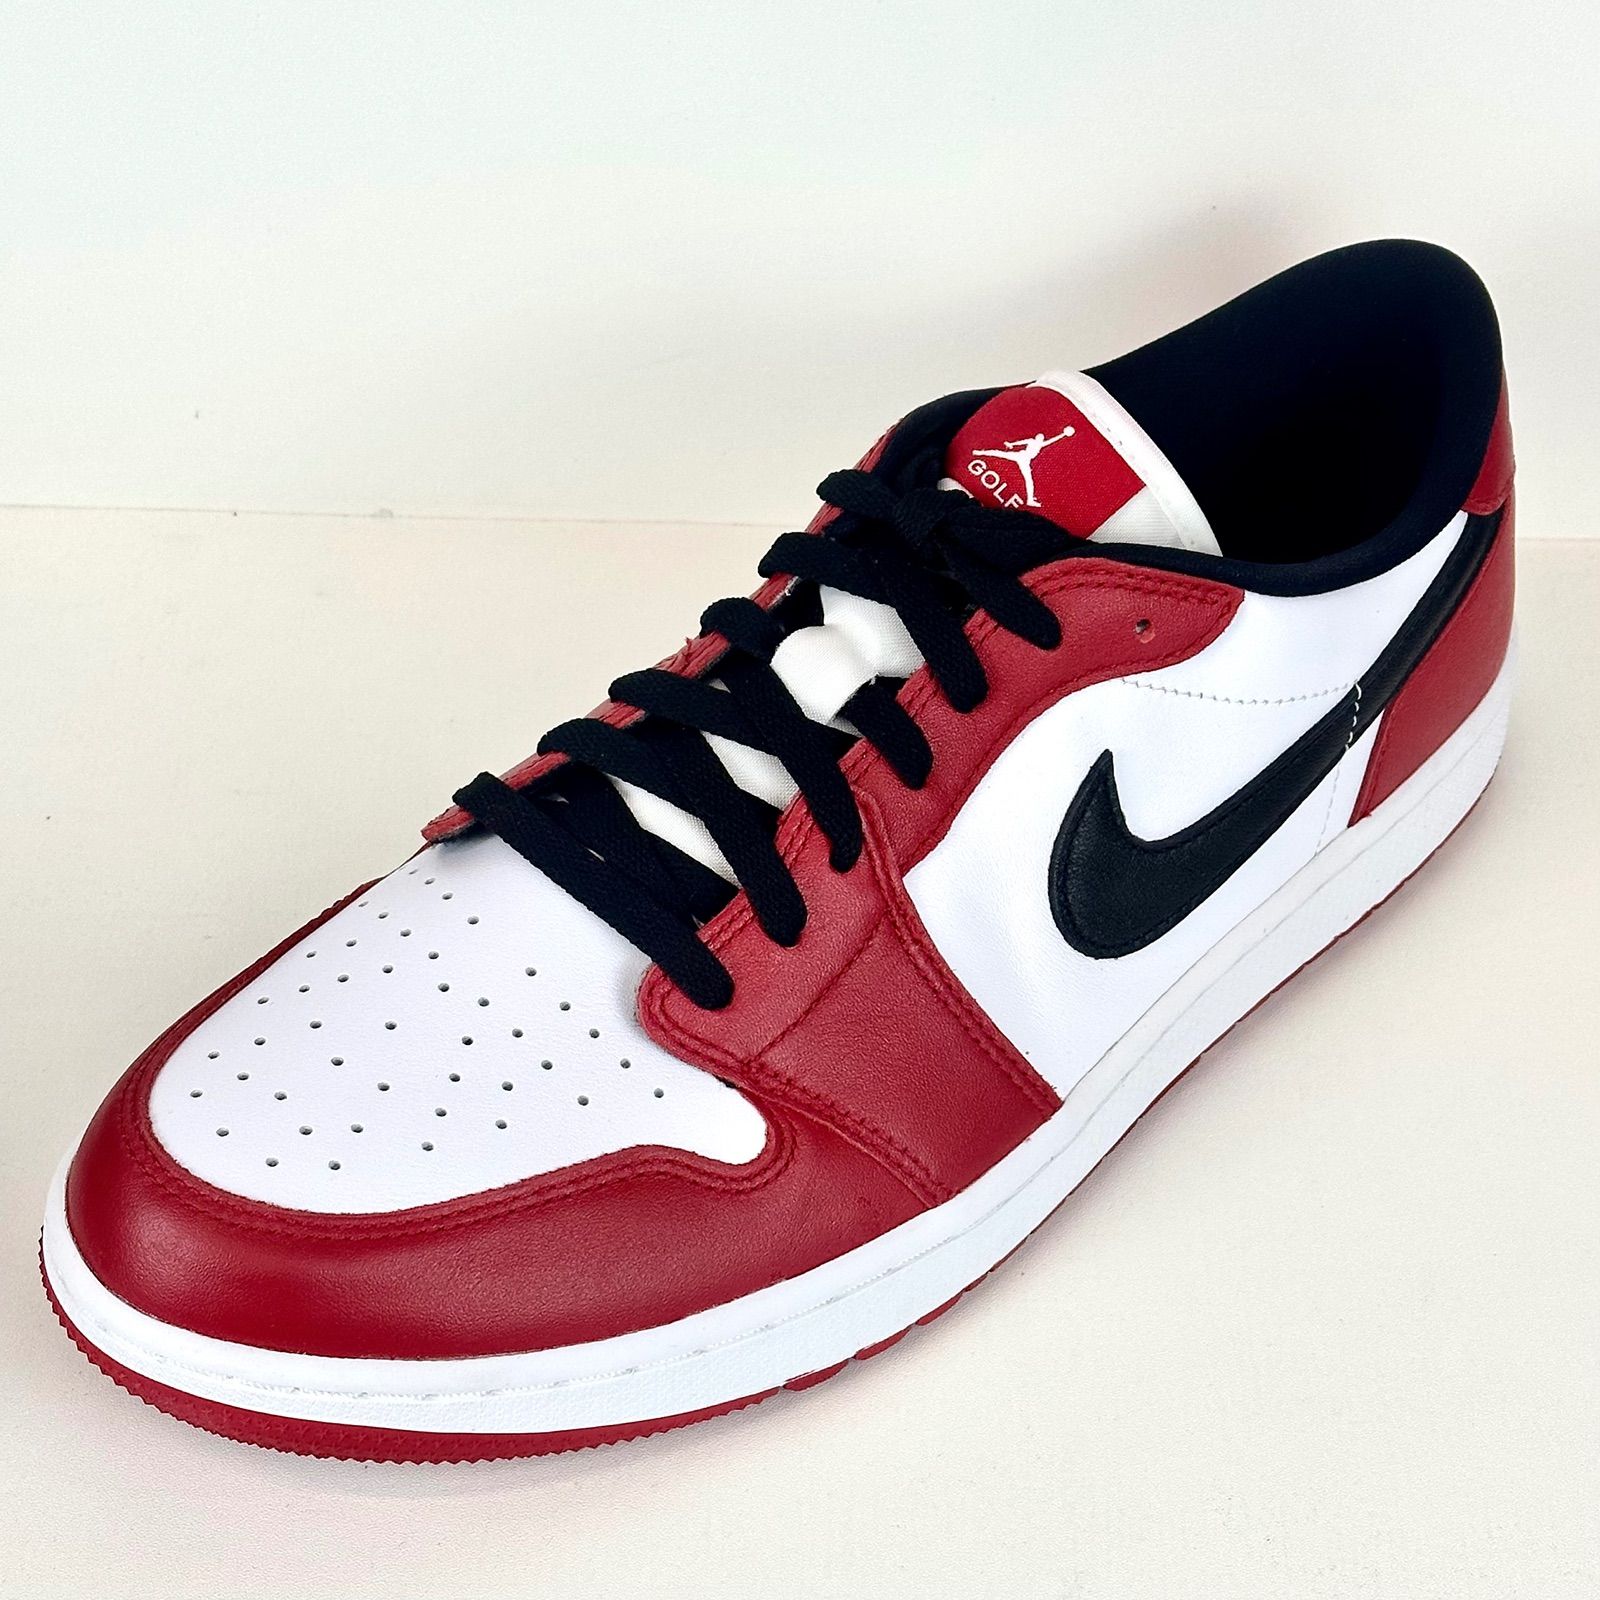 Nike Air Jordan 1 Low Golf Shoes - Chicago (Red/White) - Size 12.5 